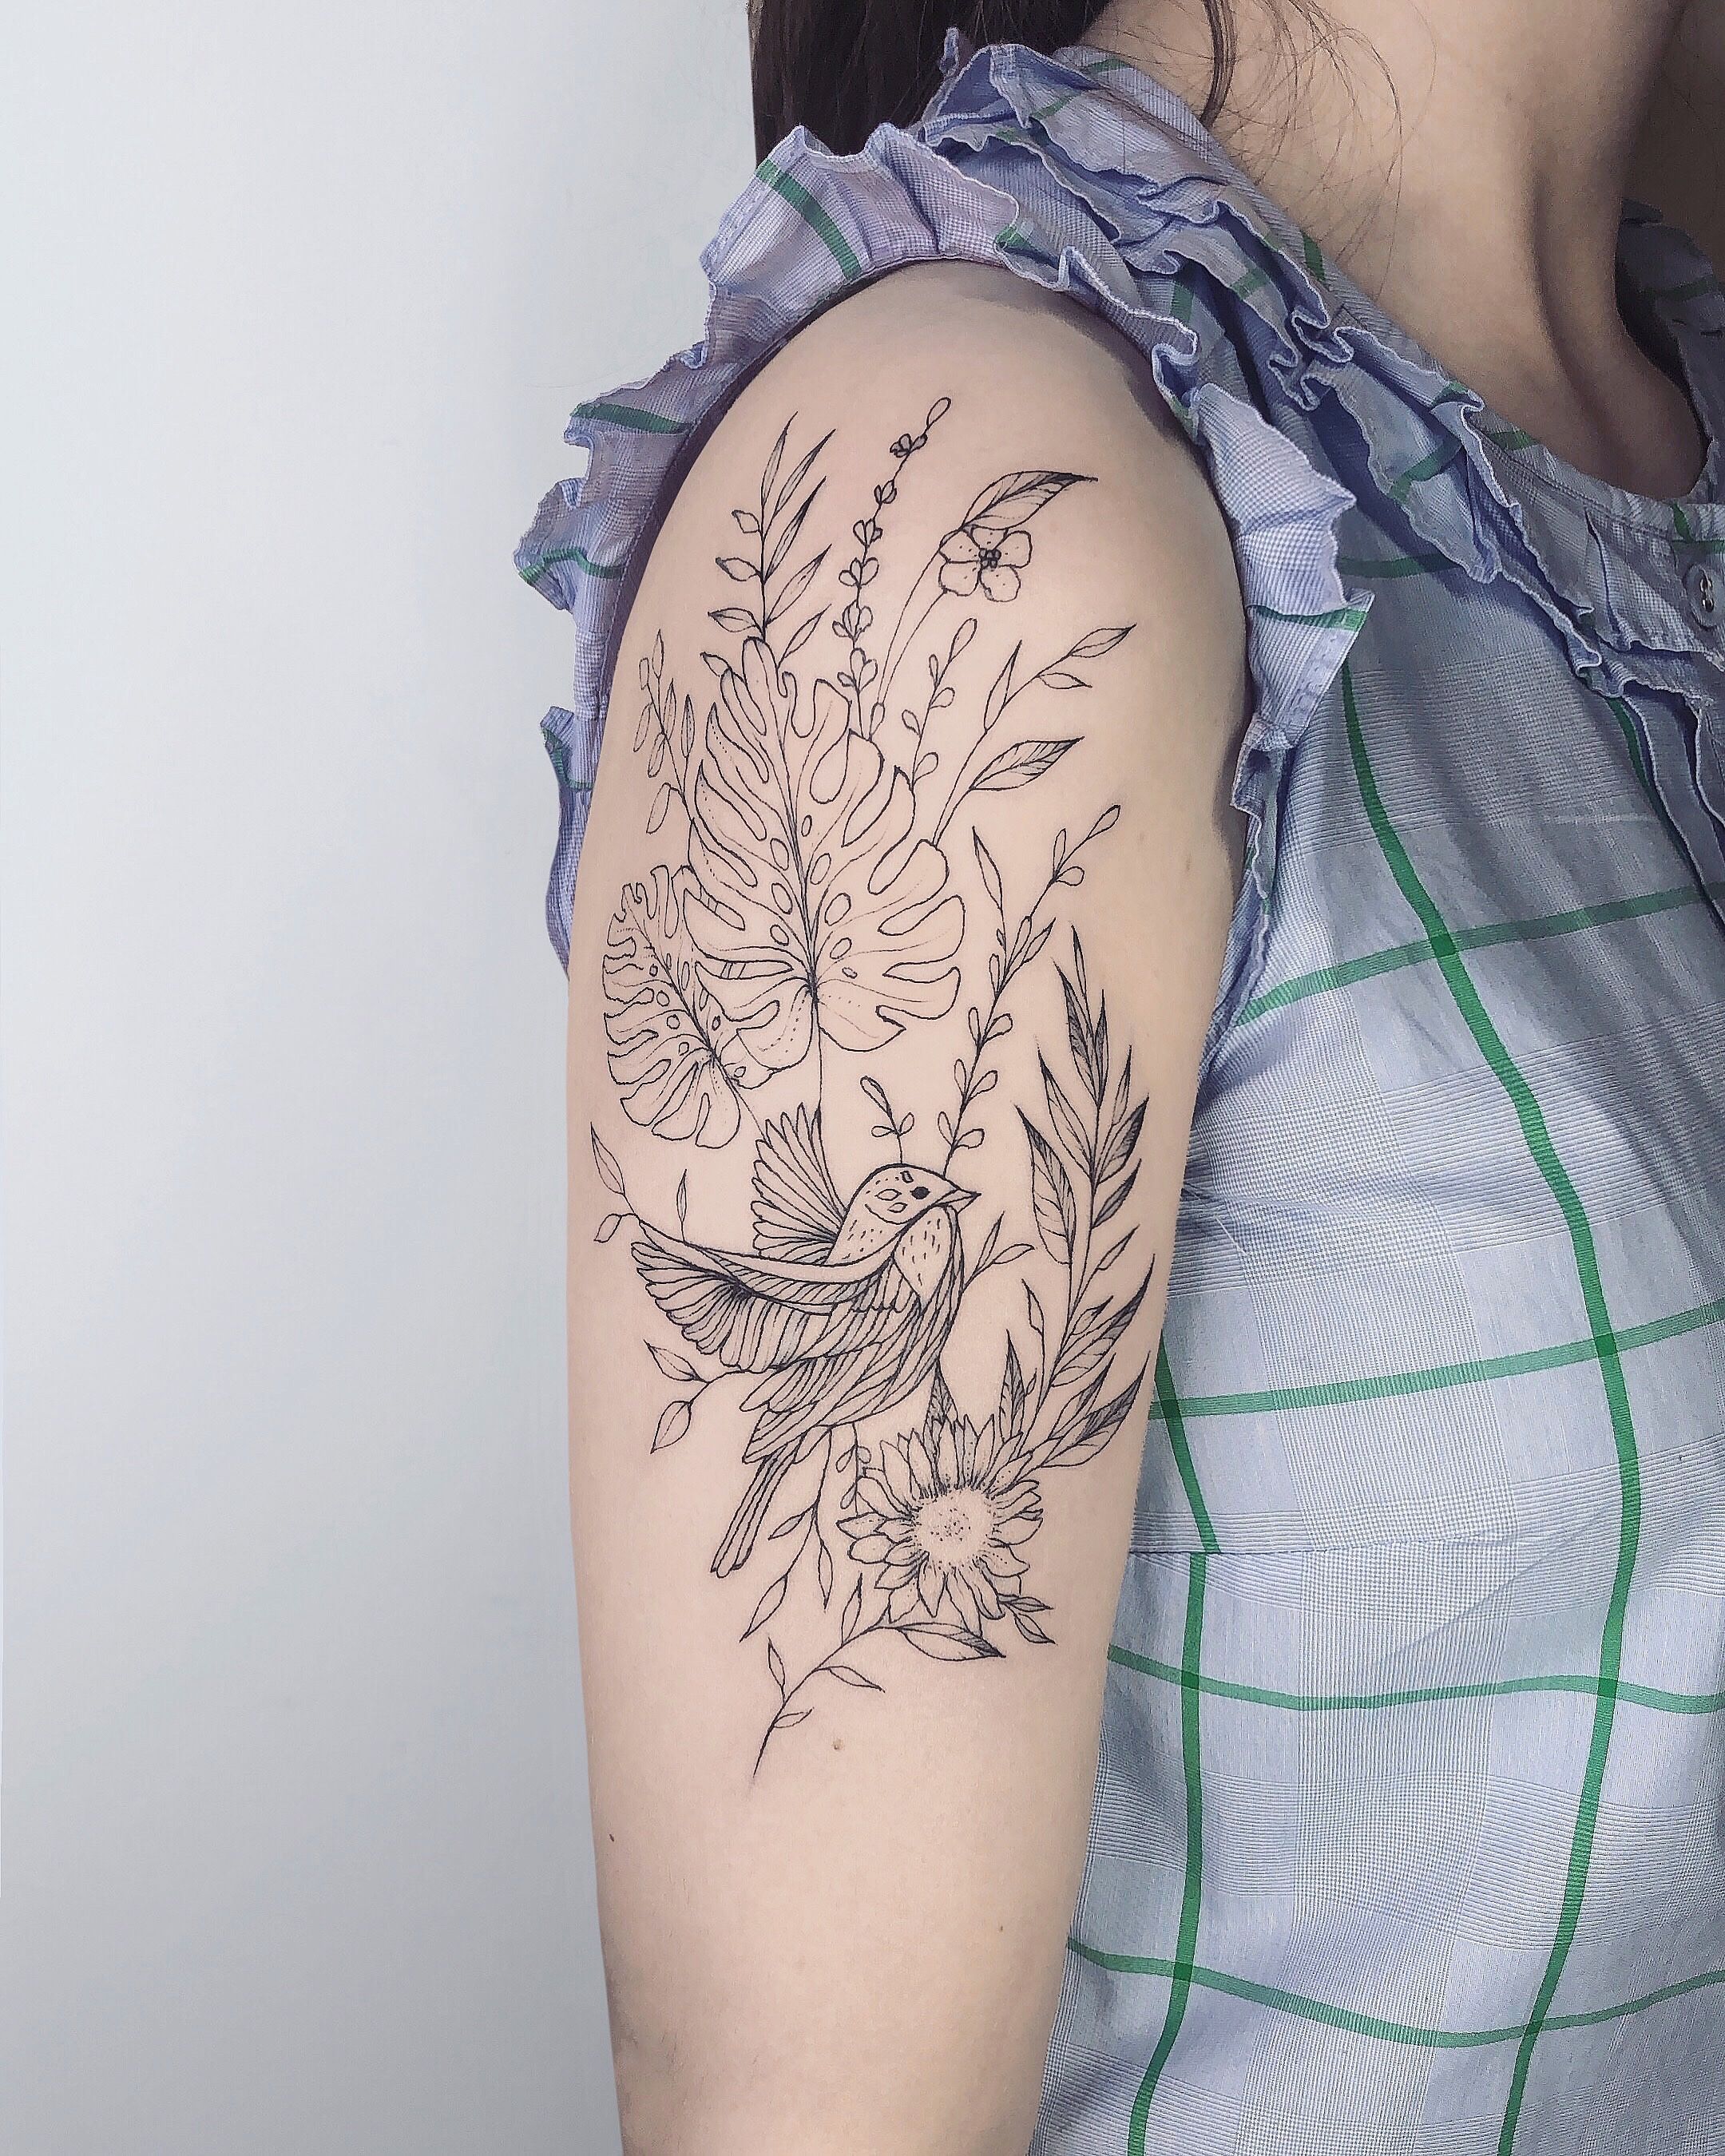 Monstera Deliciousa by Morag from Skinscape South Africa  rtattoos